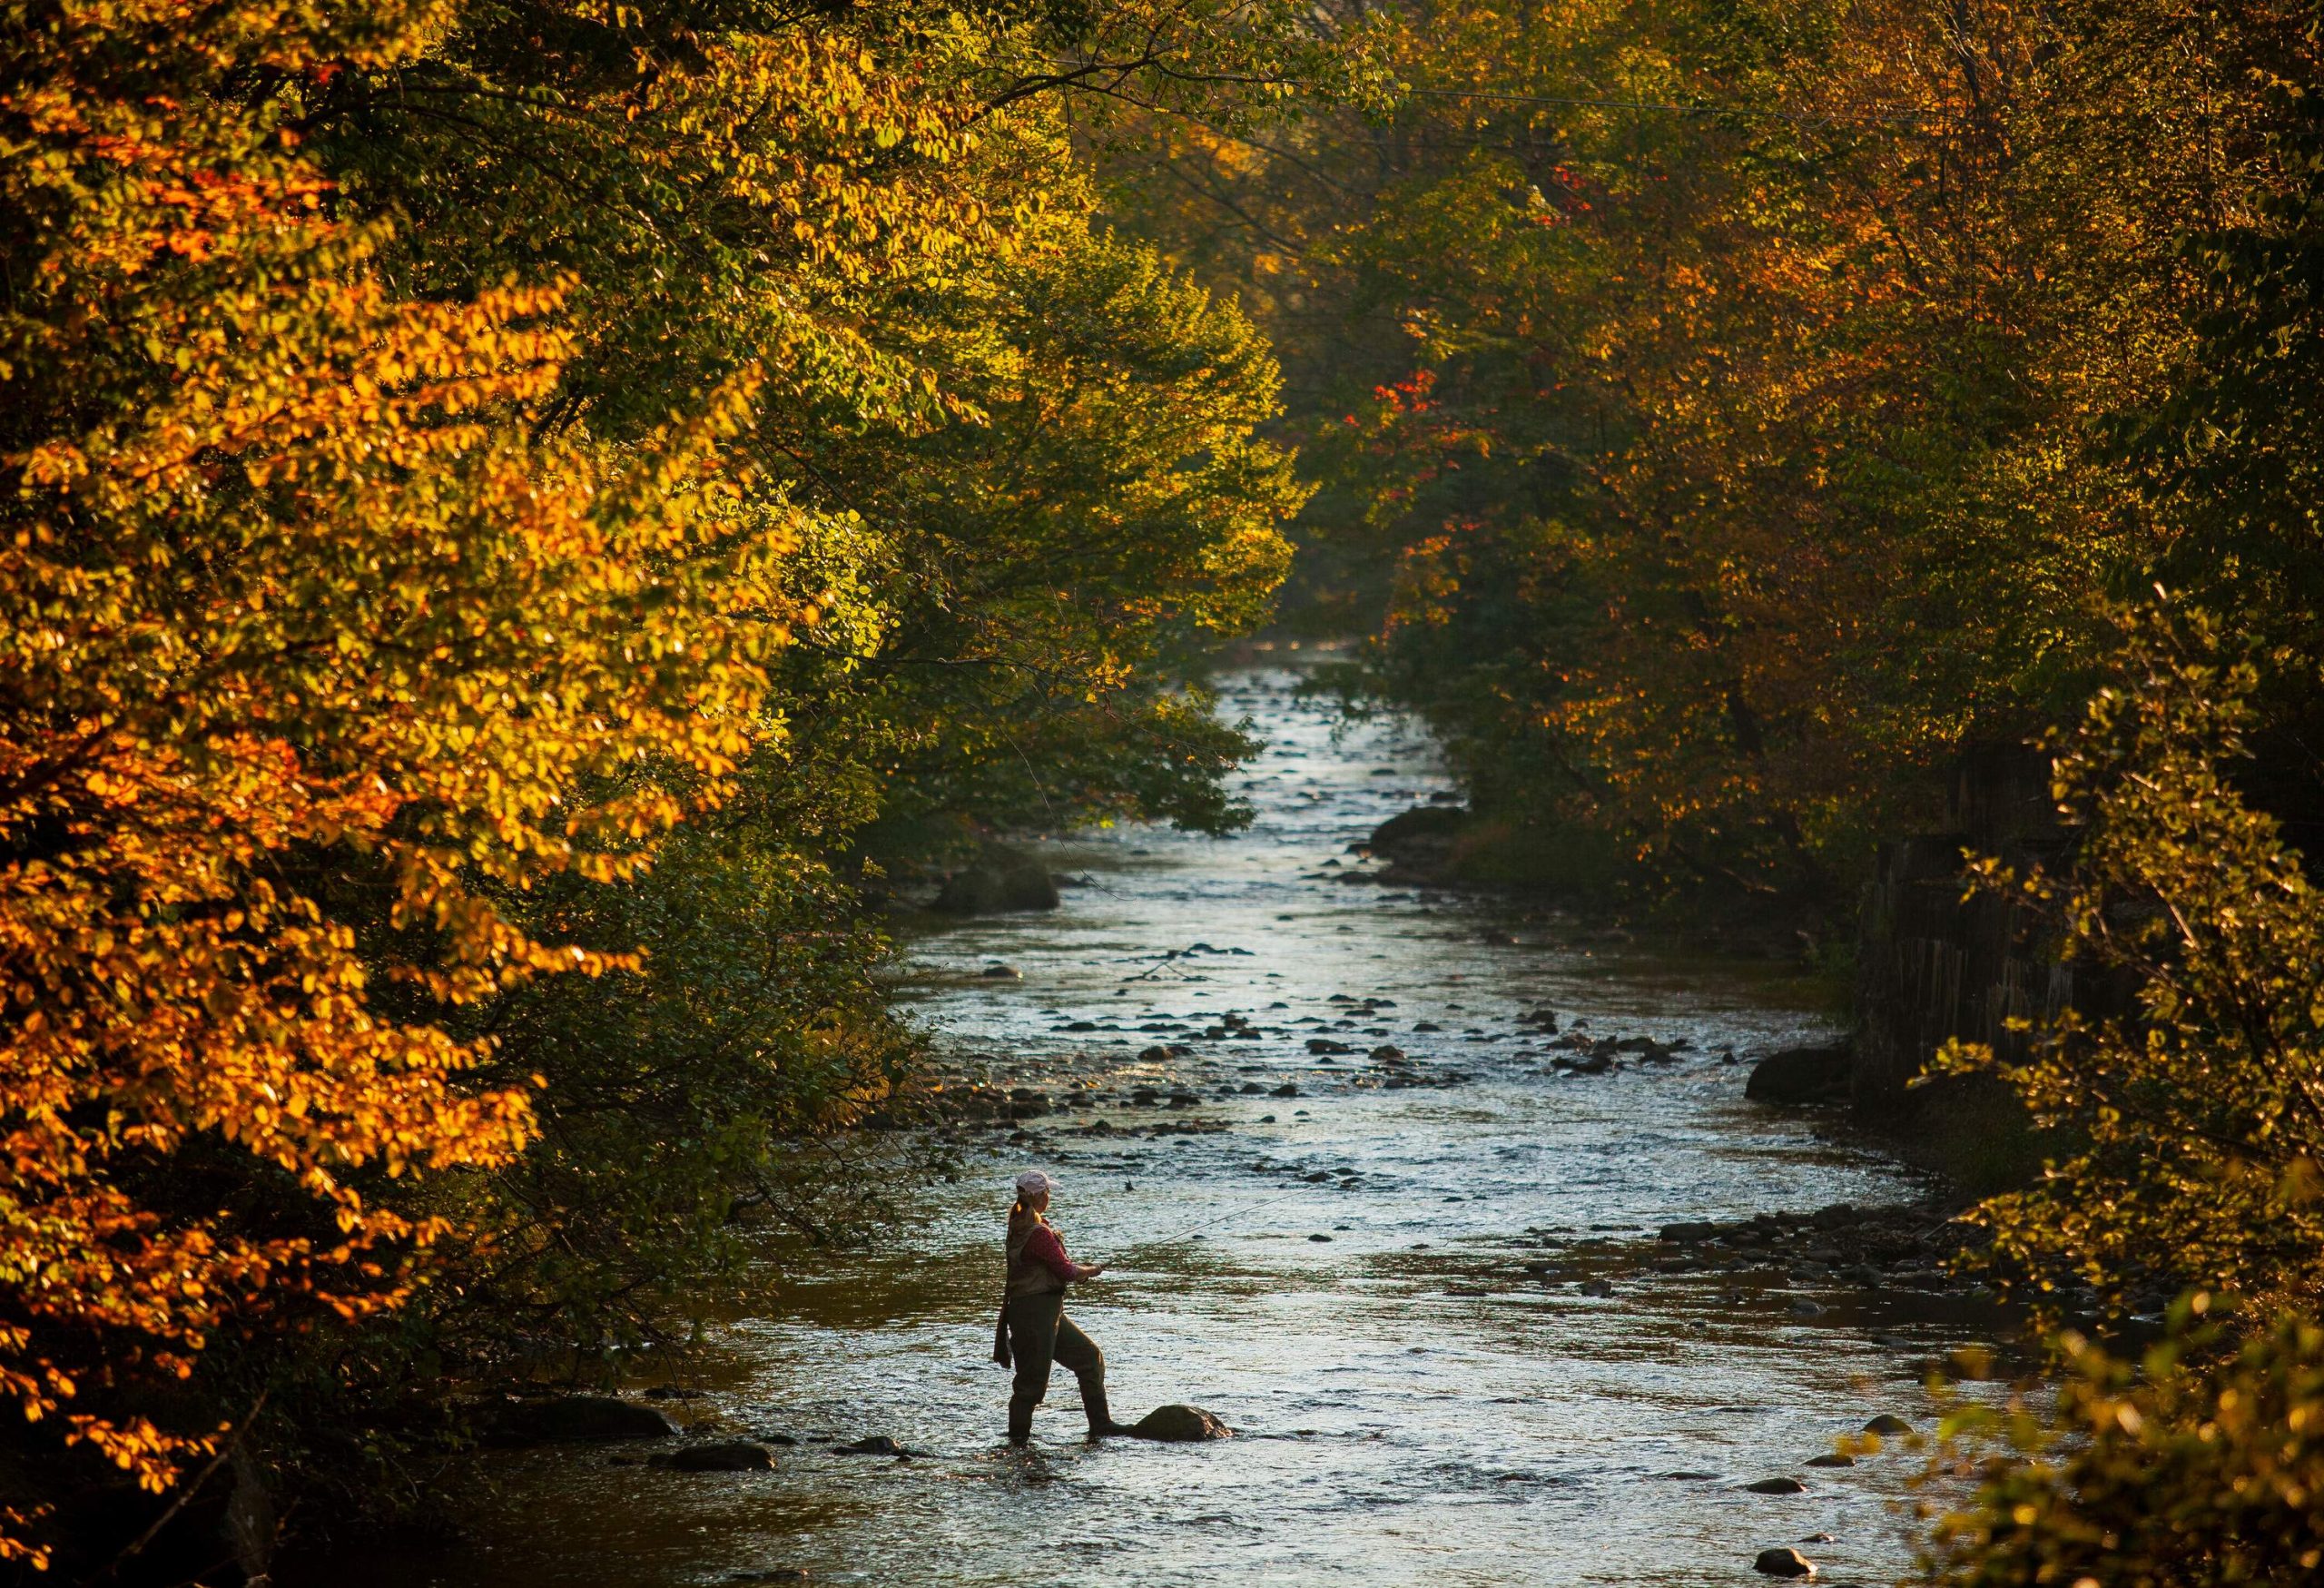 A person fishing in the middle of a shallow river flanked by deciduous trees on each side.